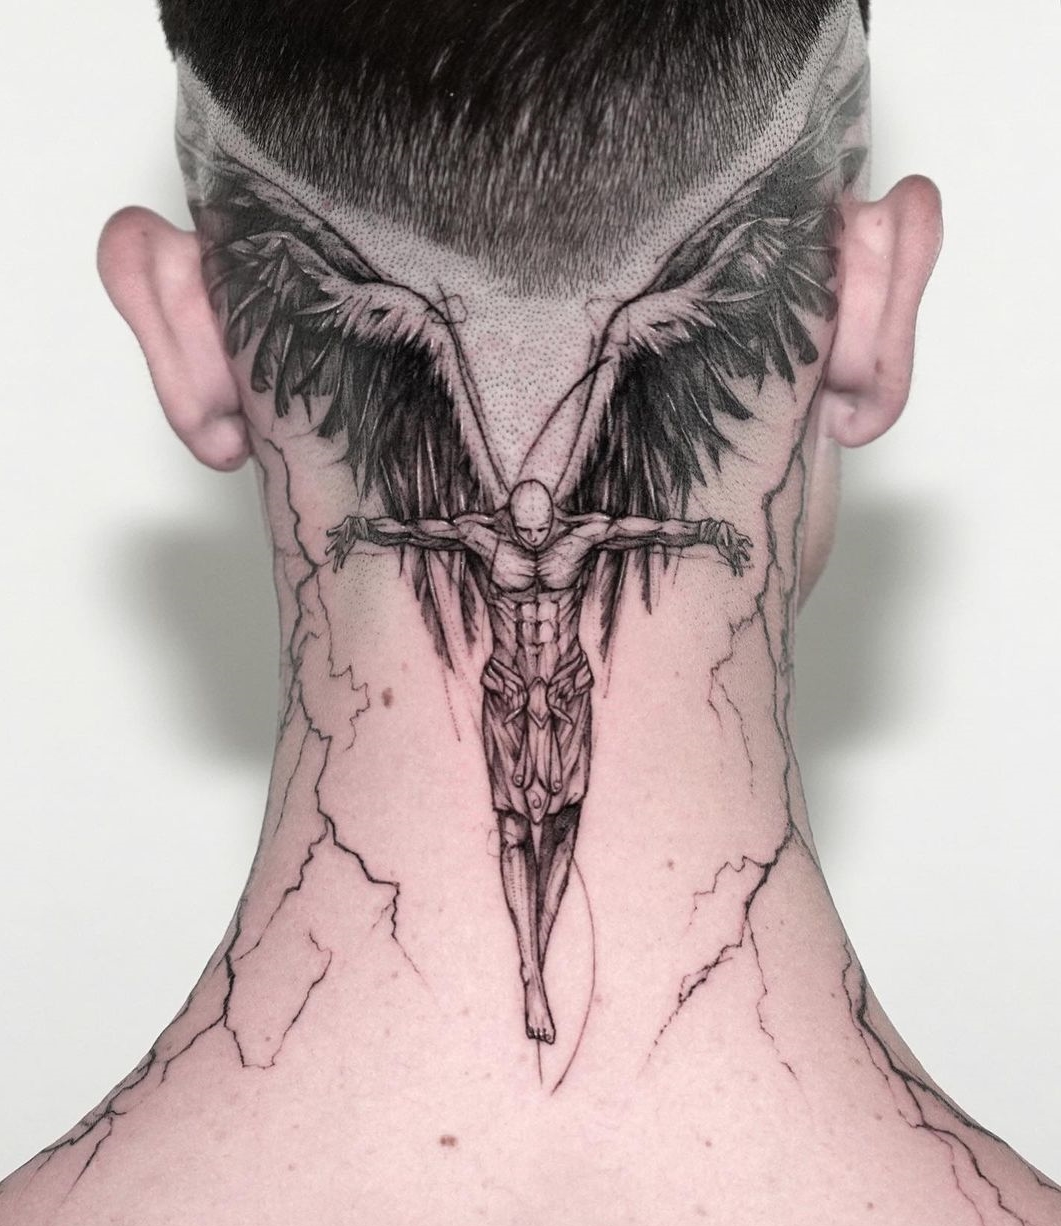 Cool Tattoos for Men | Best neck tattoos, Neck tattoo, Cool tattoos for guys